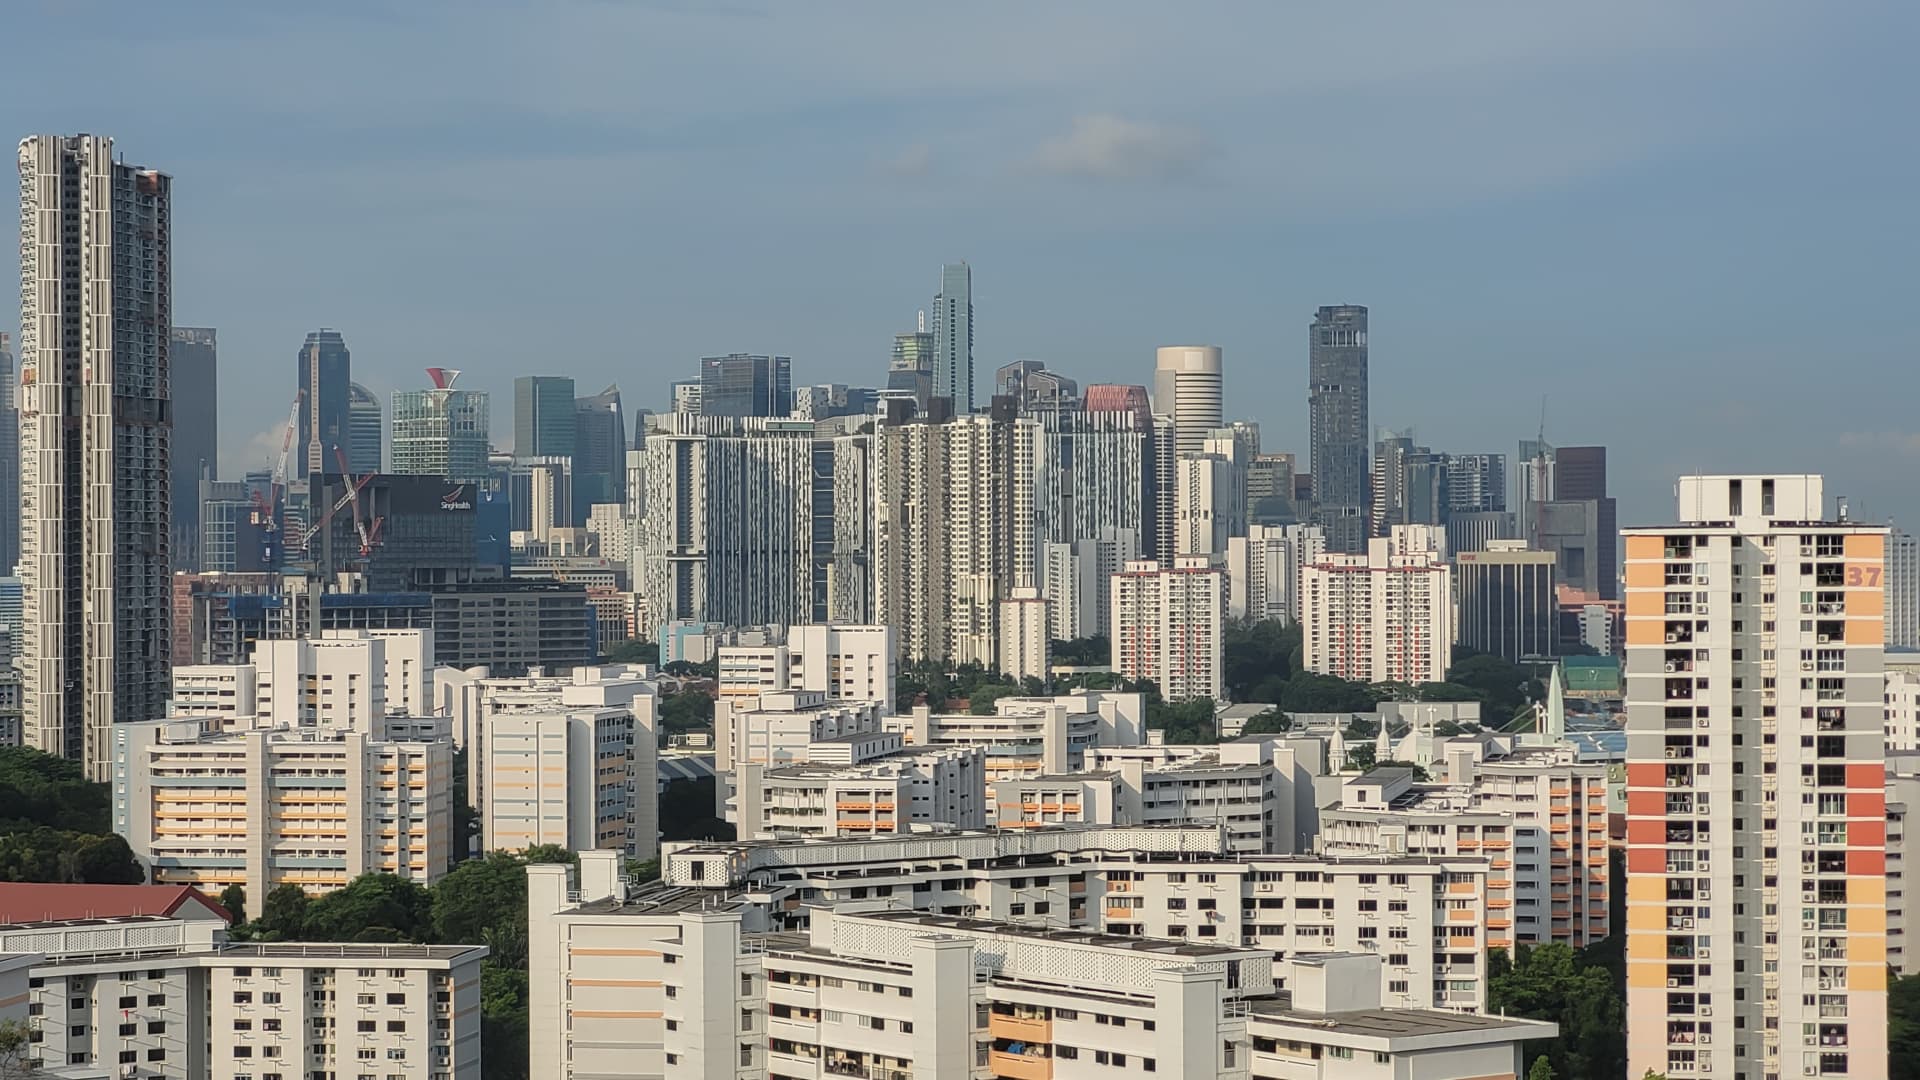 Homeowners in Singapore could soon feel the pinch from rising mortgage rates